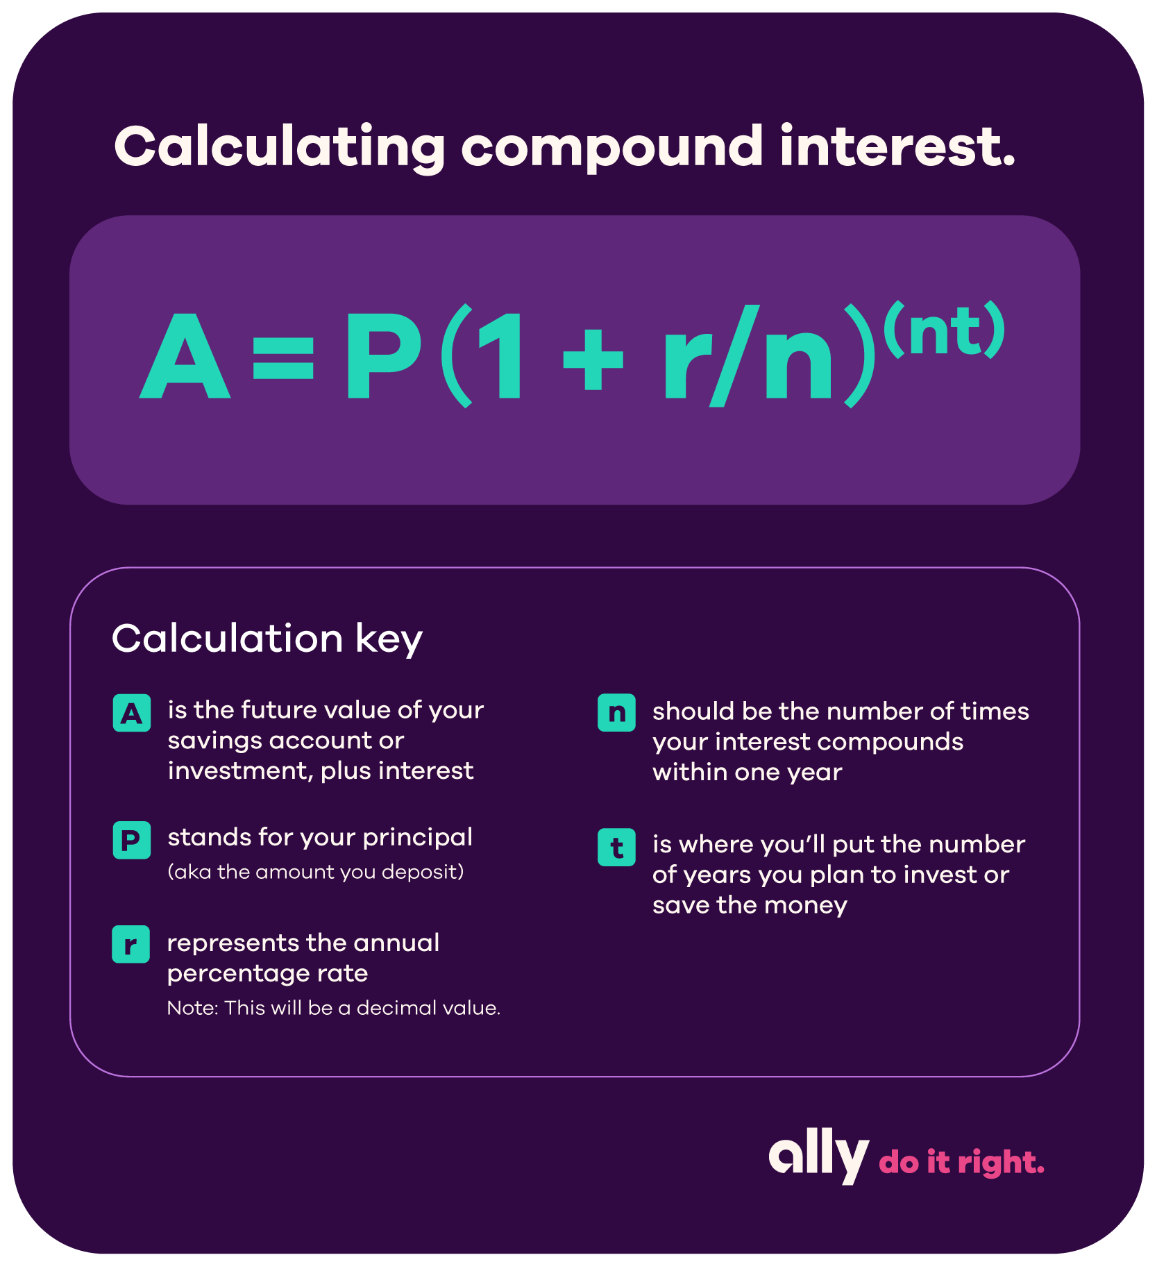 Infographic reading: Calculating compound interest. A=P(1+r/n)(nt). Calculation key: 'A' is the future value of your savings account or investment, plus interest. 'P' stands for your principal (aka the amount you deposit). 'r' represents the annual percentage rate - Note: this will be a decimal value. 'n' should be the number of times your interest compounds within one year. 't' is where you'll put the number of years you plan to invest or save the money.